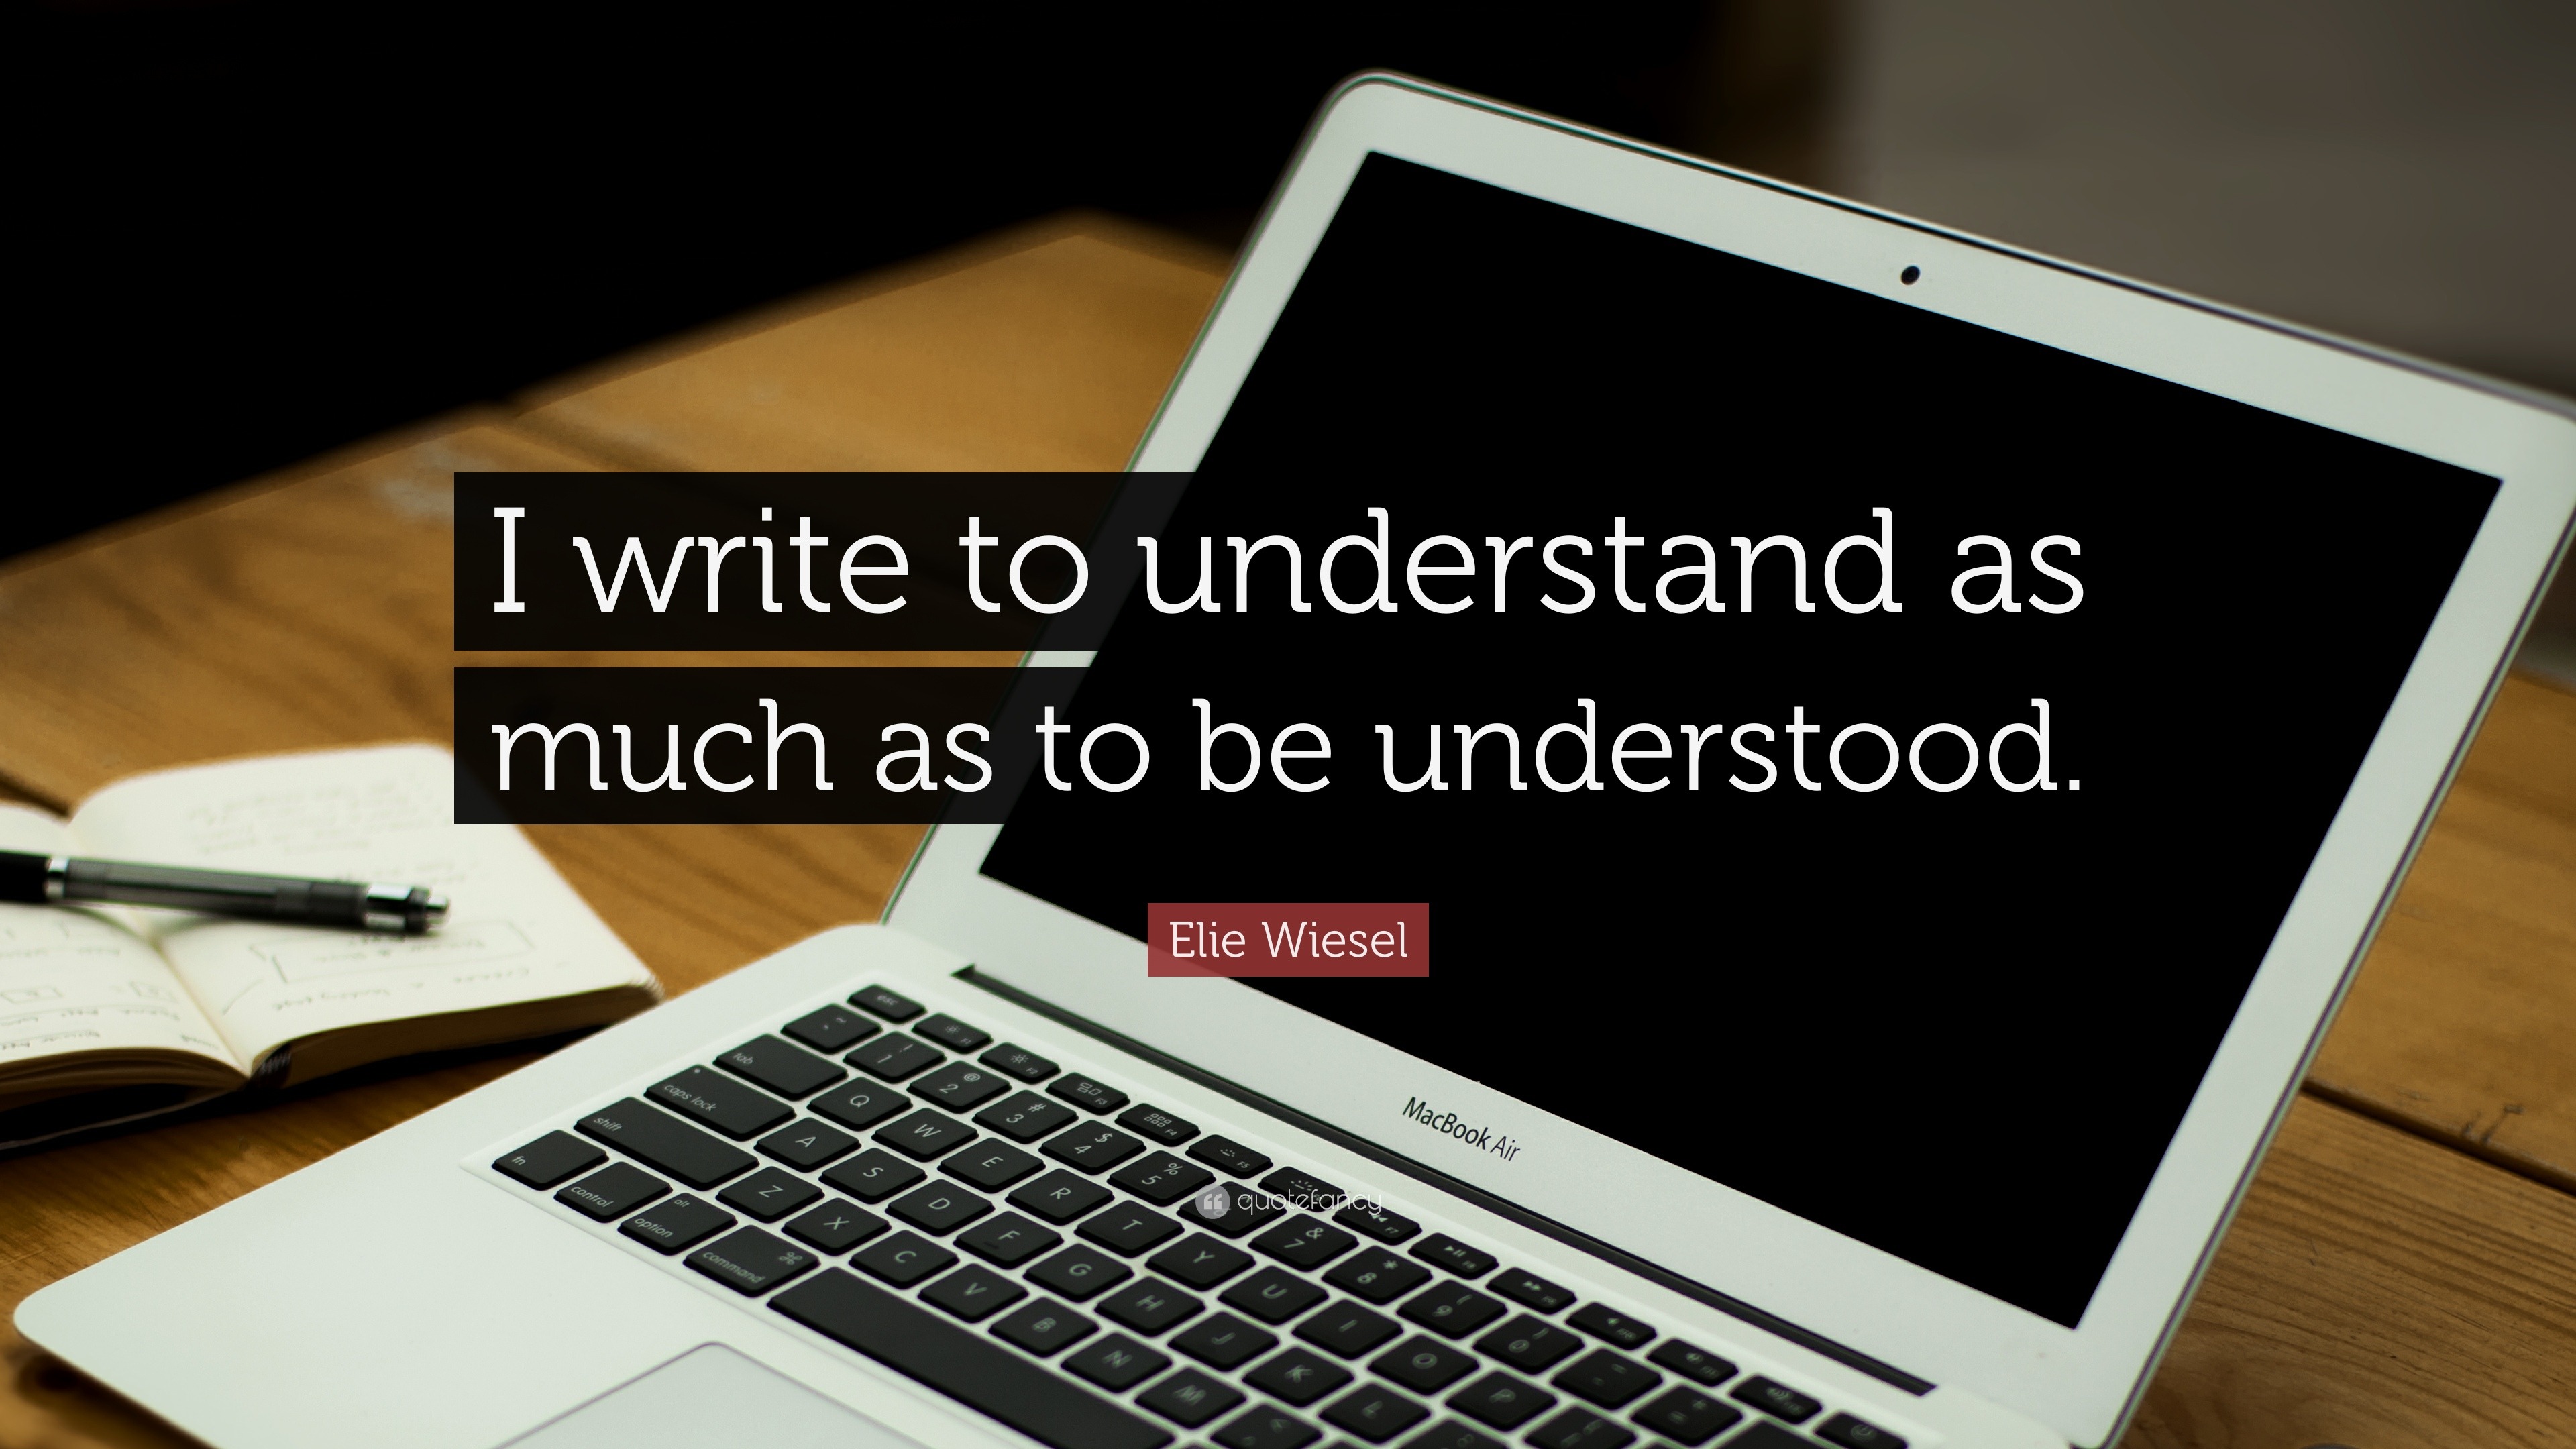 Writing to Be Understood by Anne H. Janzer